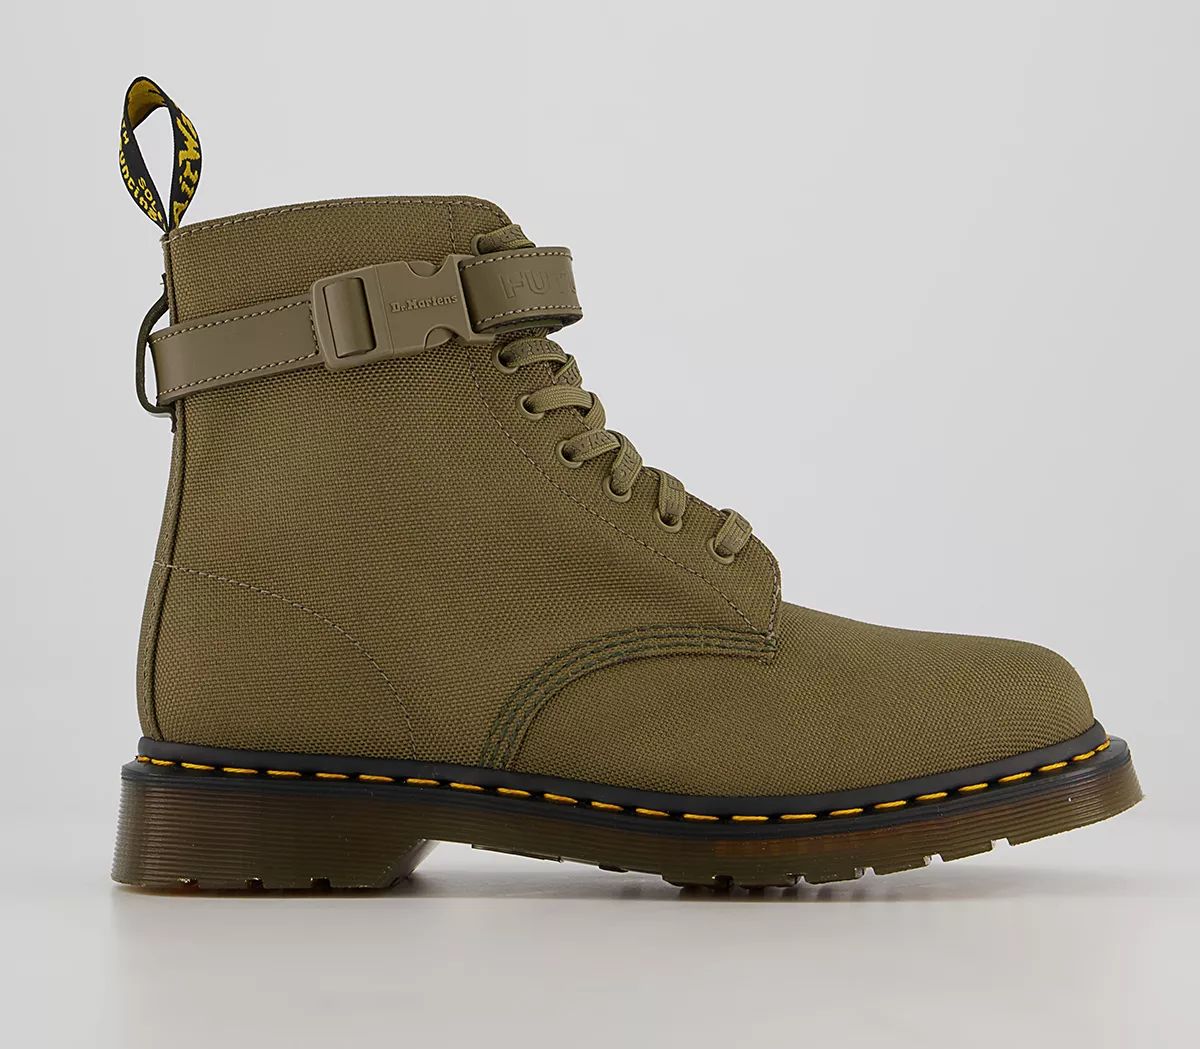 Dr. Martens 1460 Futura Boots Olive Etr 5050 Woven Fabric - Men’s Boots | Offspring (UK)